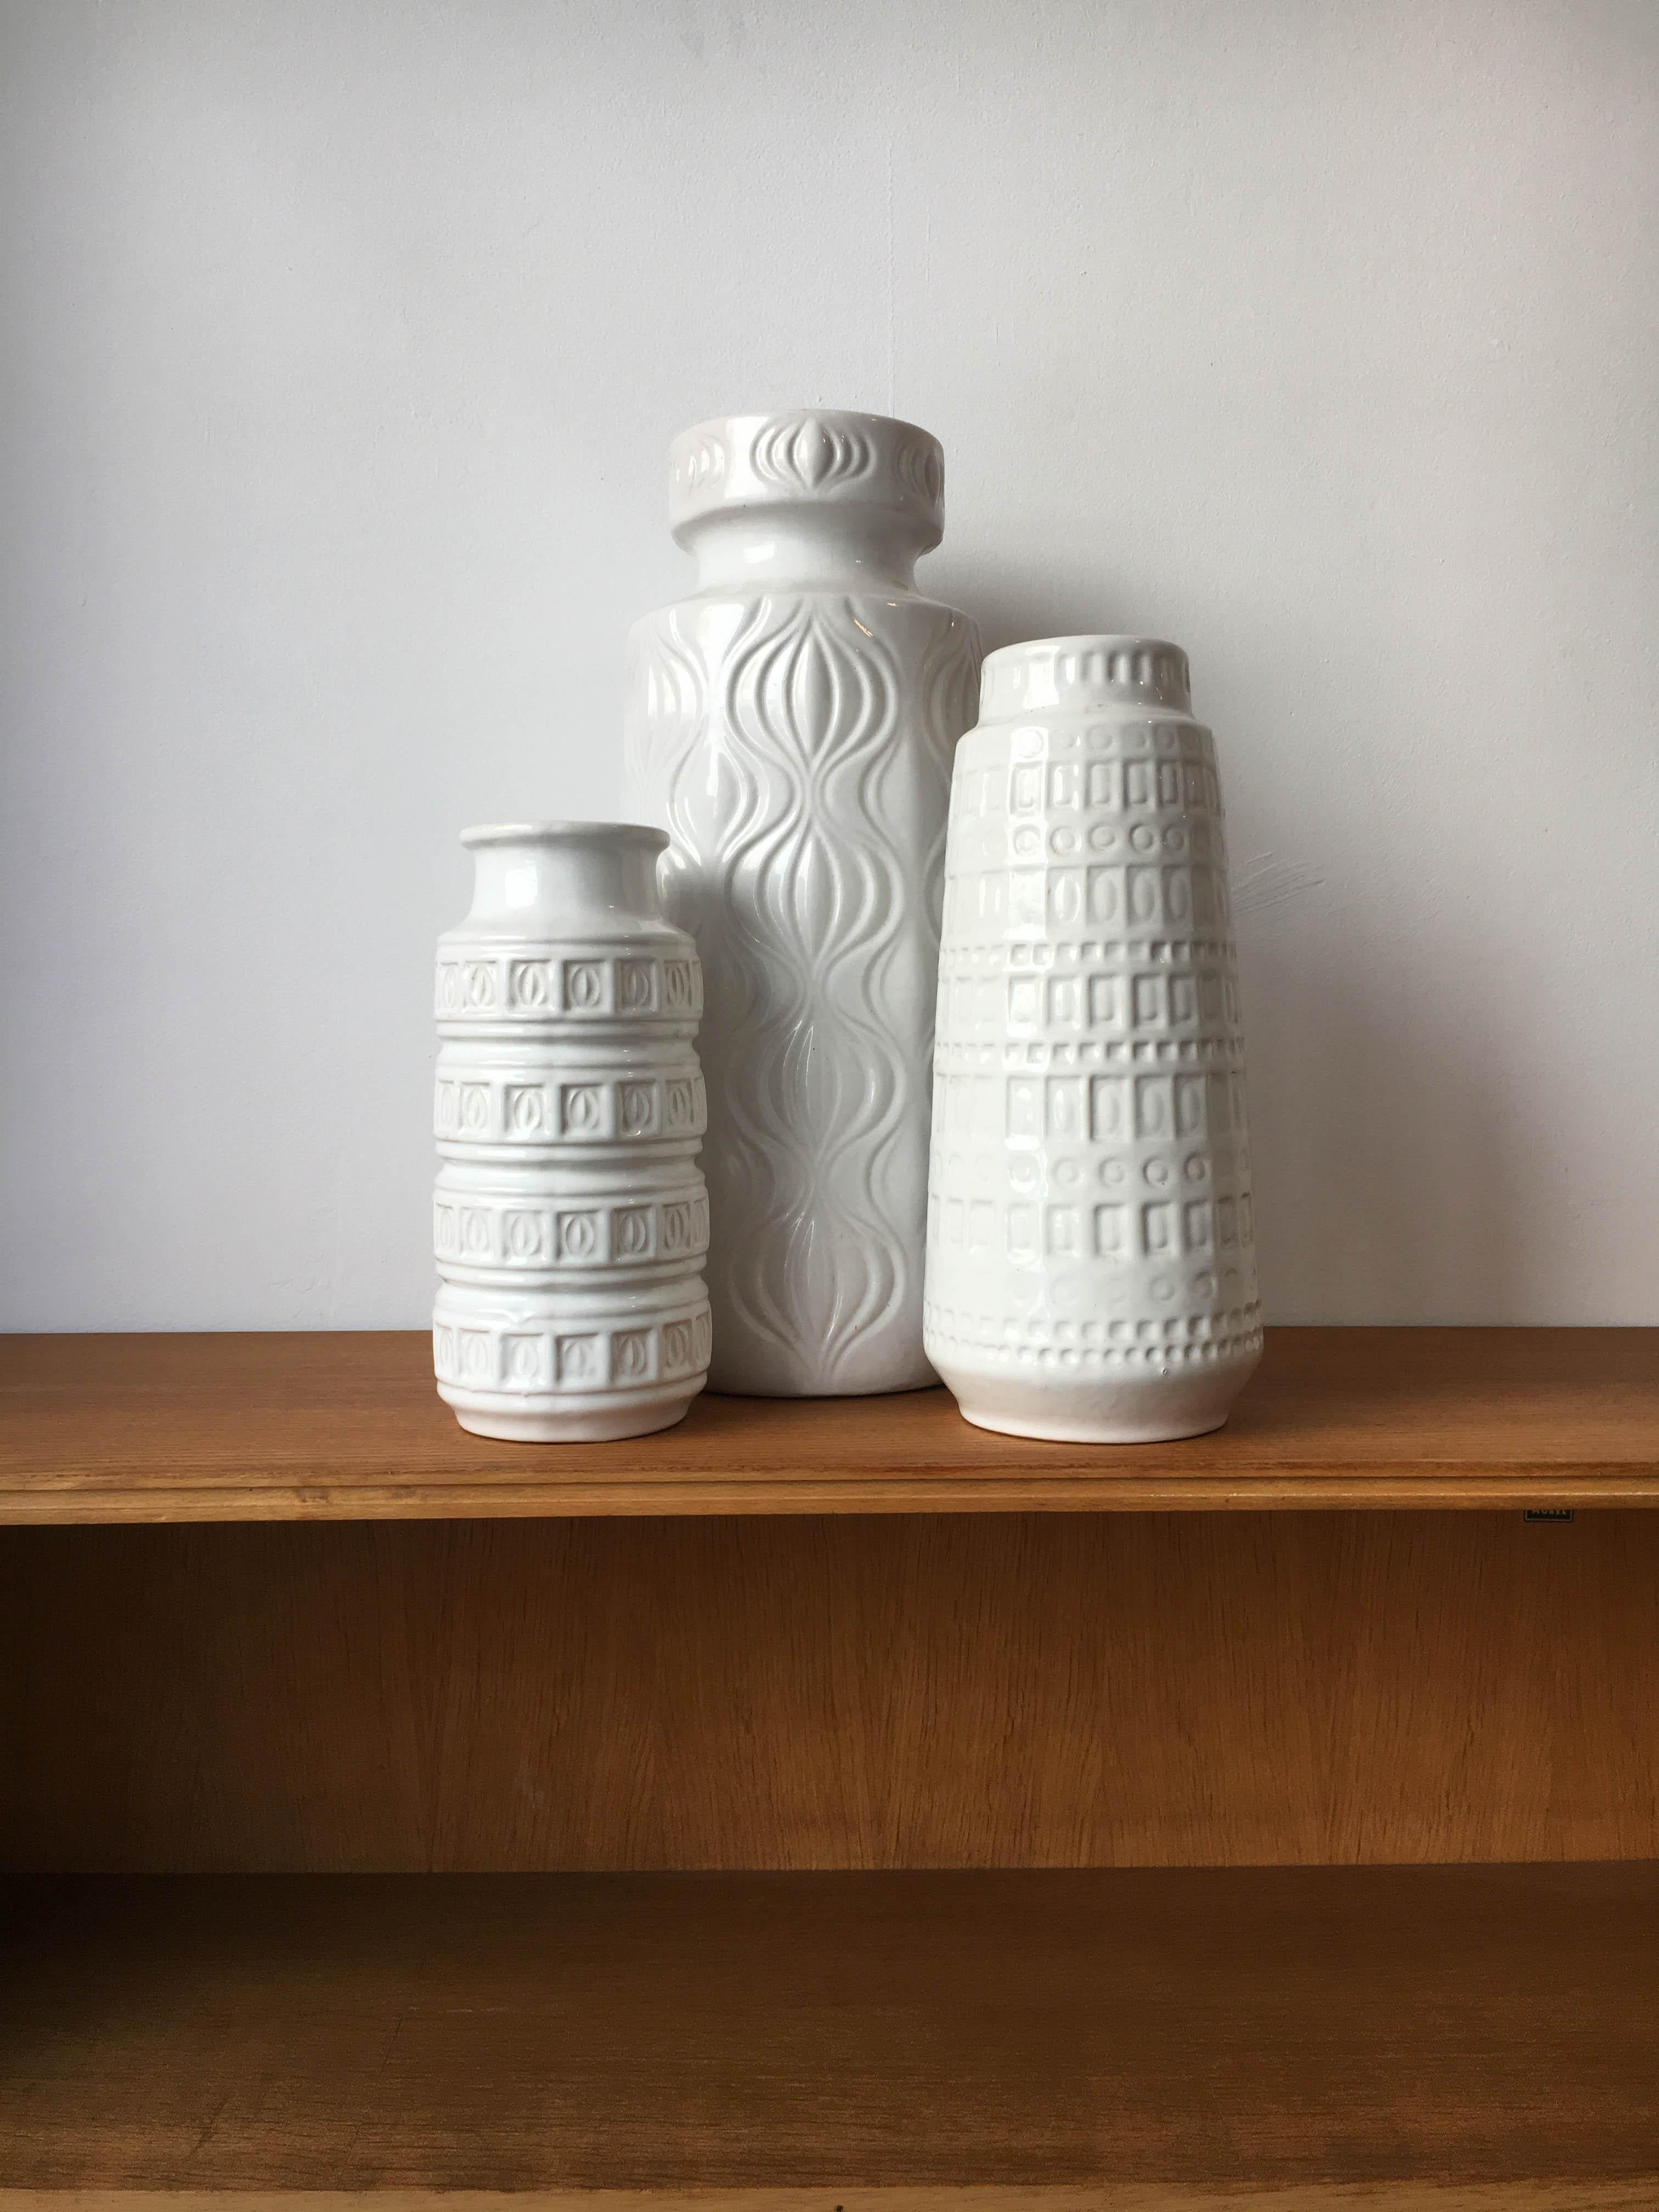 Set of three West Germany pottery vessels or vases, in all modernist white, with a variations of minimal patterns on the outside, Germany, 1960s.